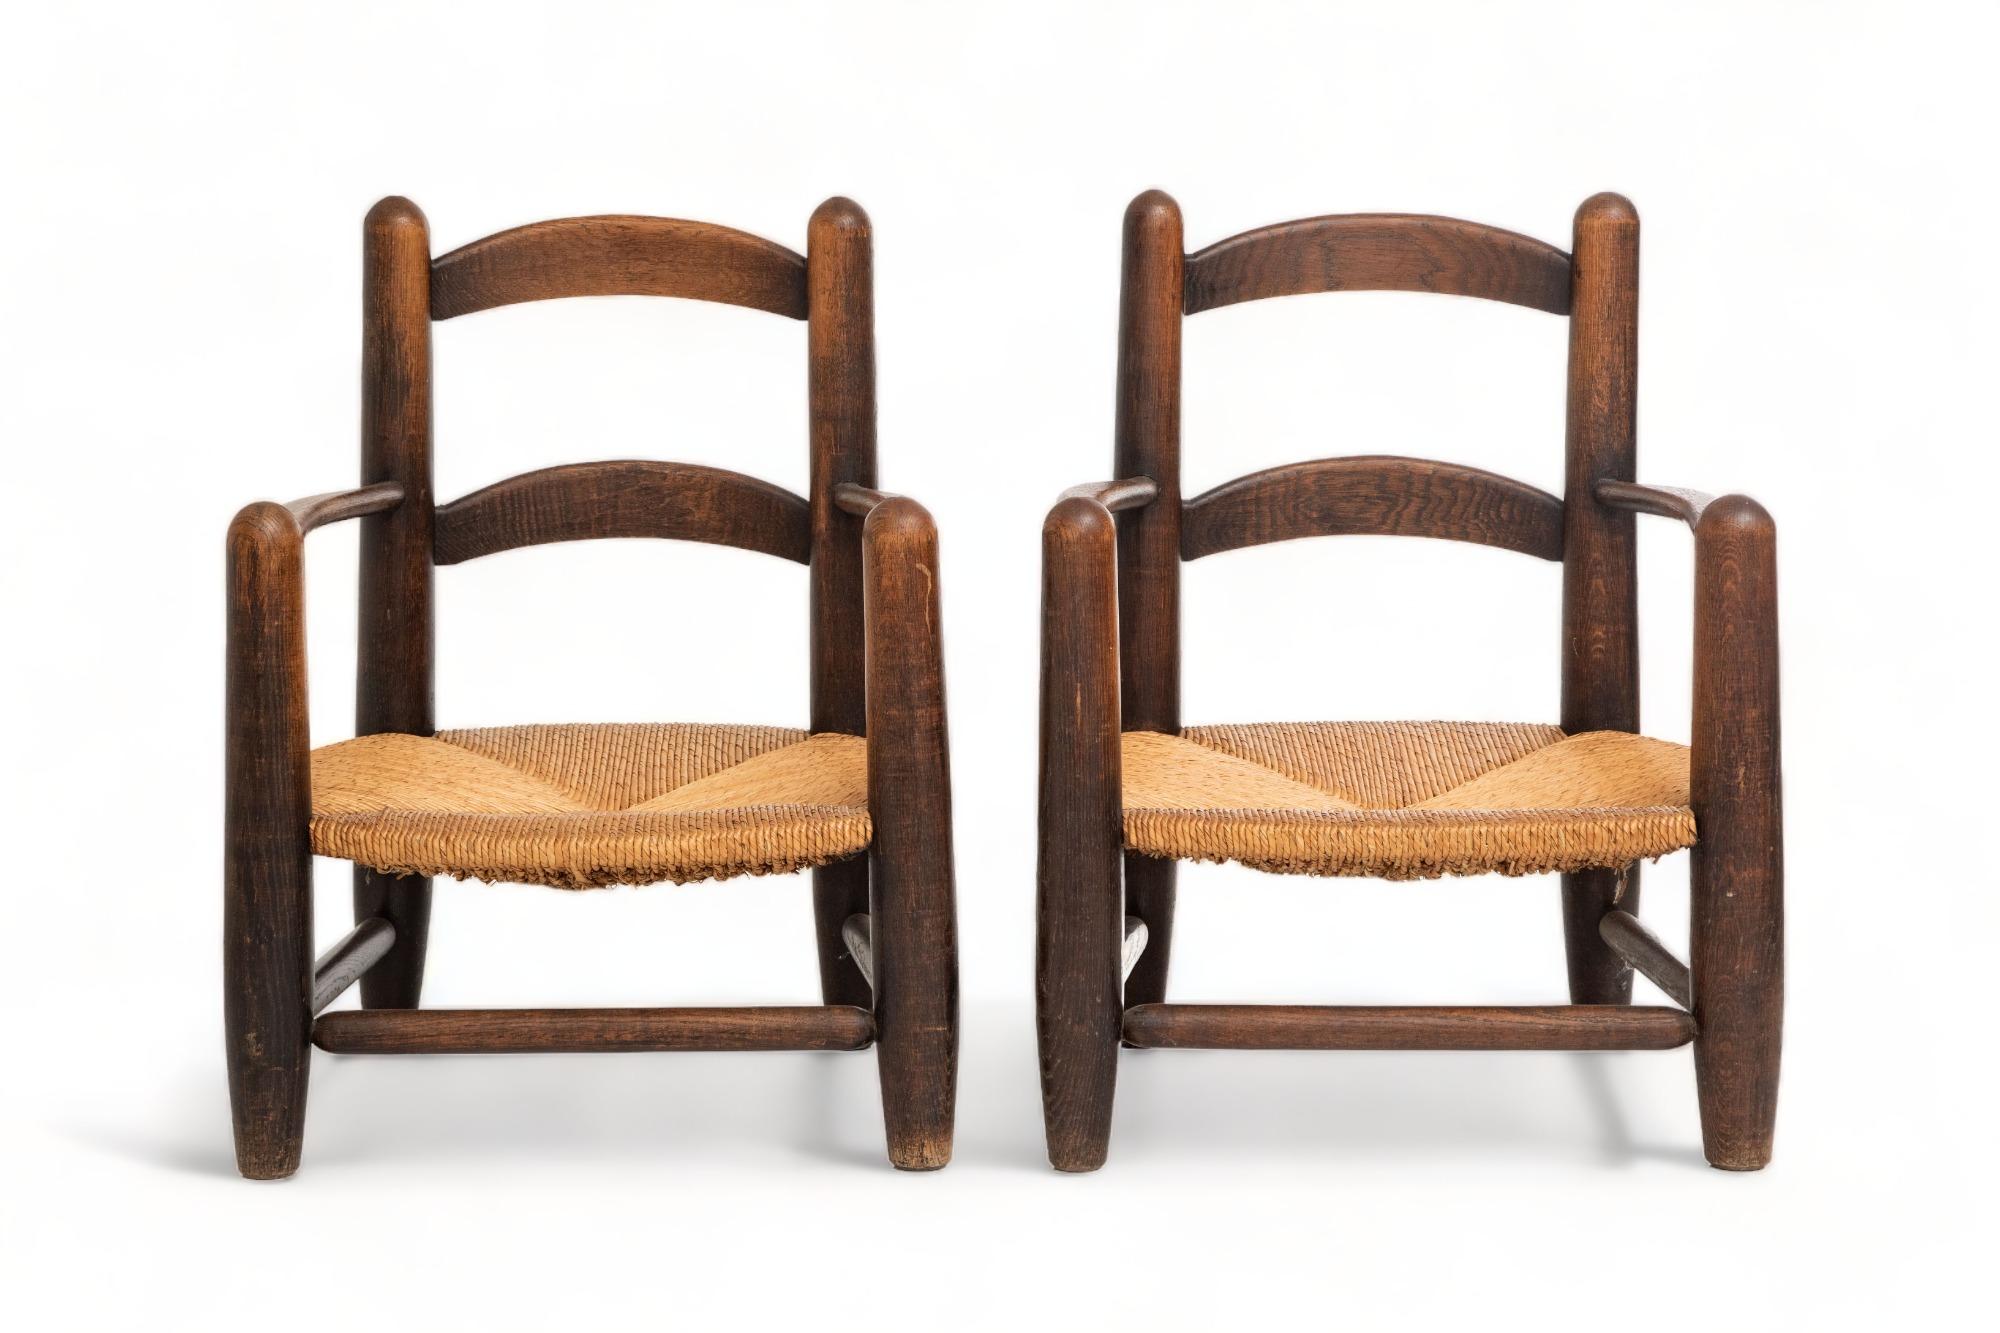 Pair of low rush seats armchairs, France, 1960's
Solid turned oak with outstanding patina and grain 
Handwoven rush seats which are in perfect original condition.
In the manner of Charlotte Perriand
 Used as fireplace armchairs
Ready to ship from